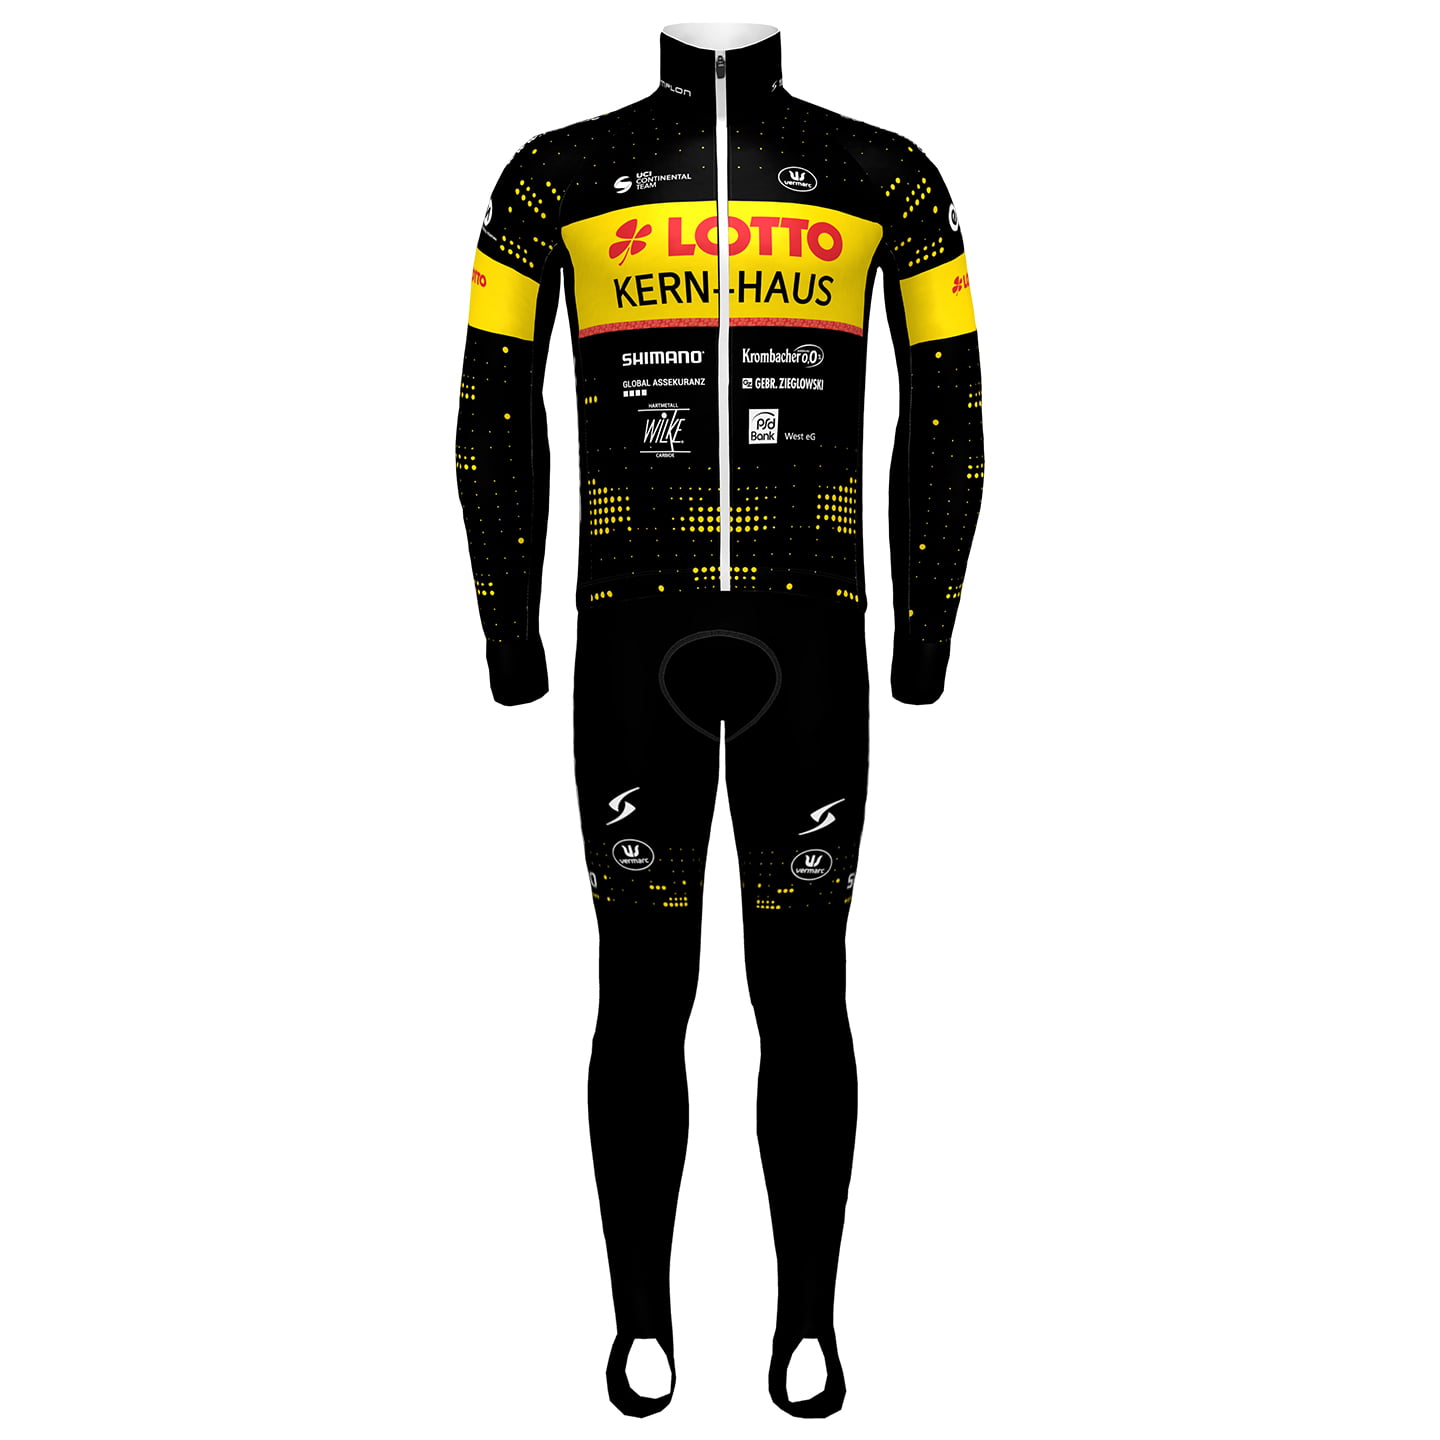 LOTTO-KERN HAUS 2023 Set (winter jacket + cycling tights) Set (2 pieces), for men